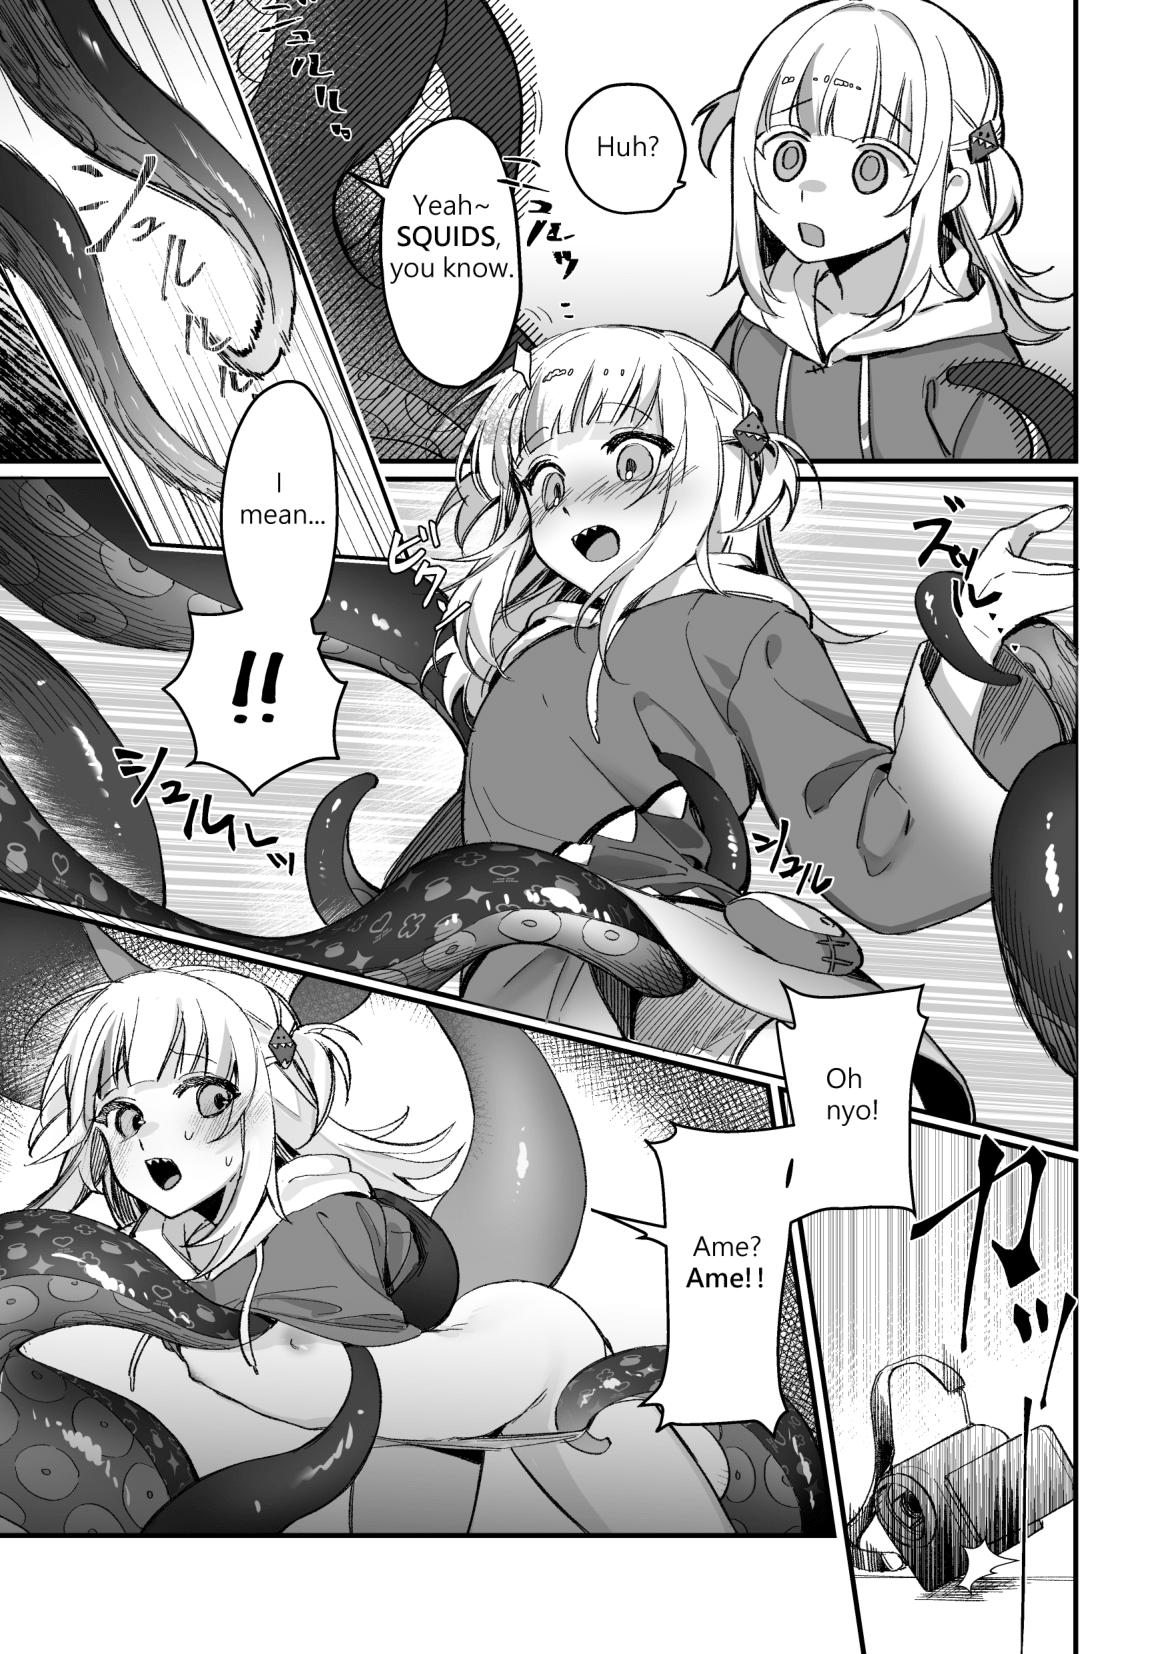 Class Room 【R-18 Comic】Tentacle!! Ina's Boing Boing is out of control!! - Hololive Speculum - Page 5